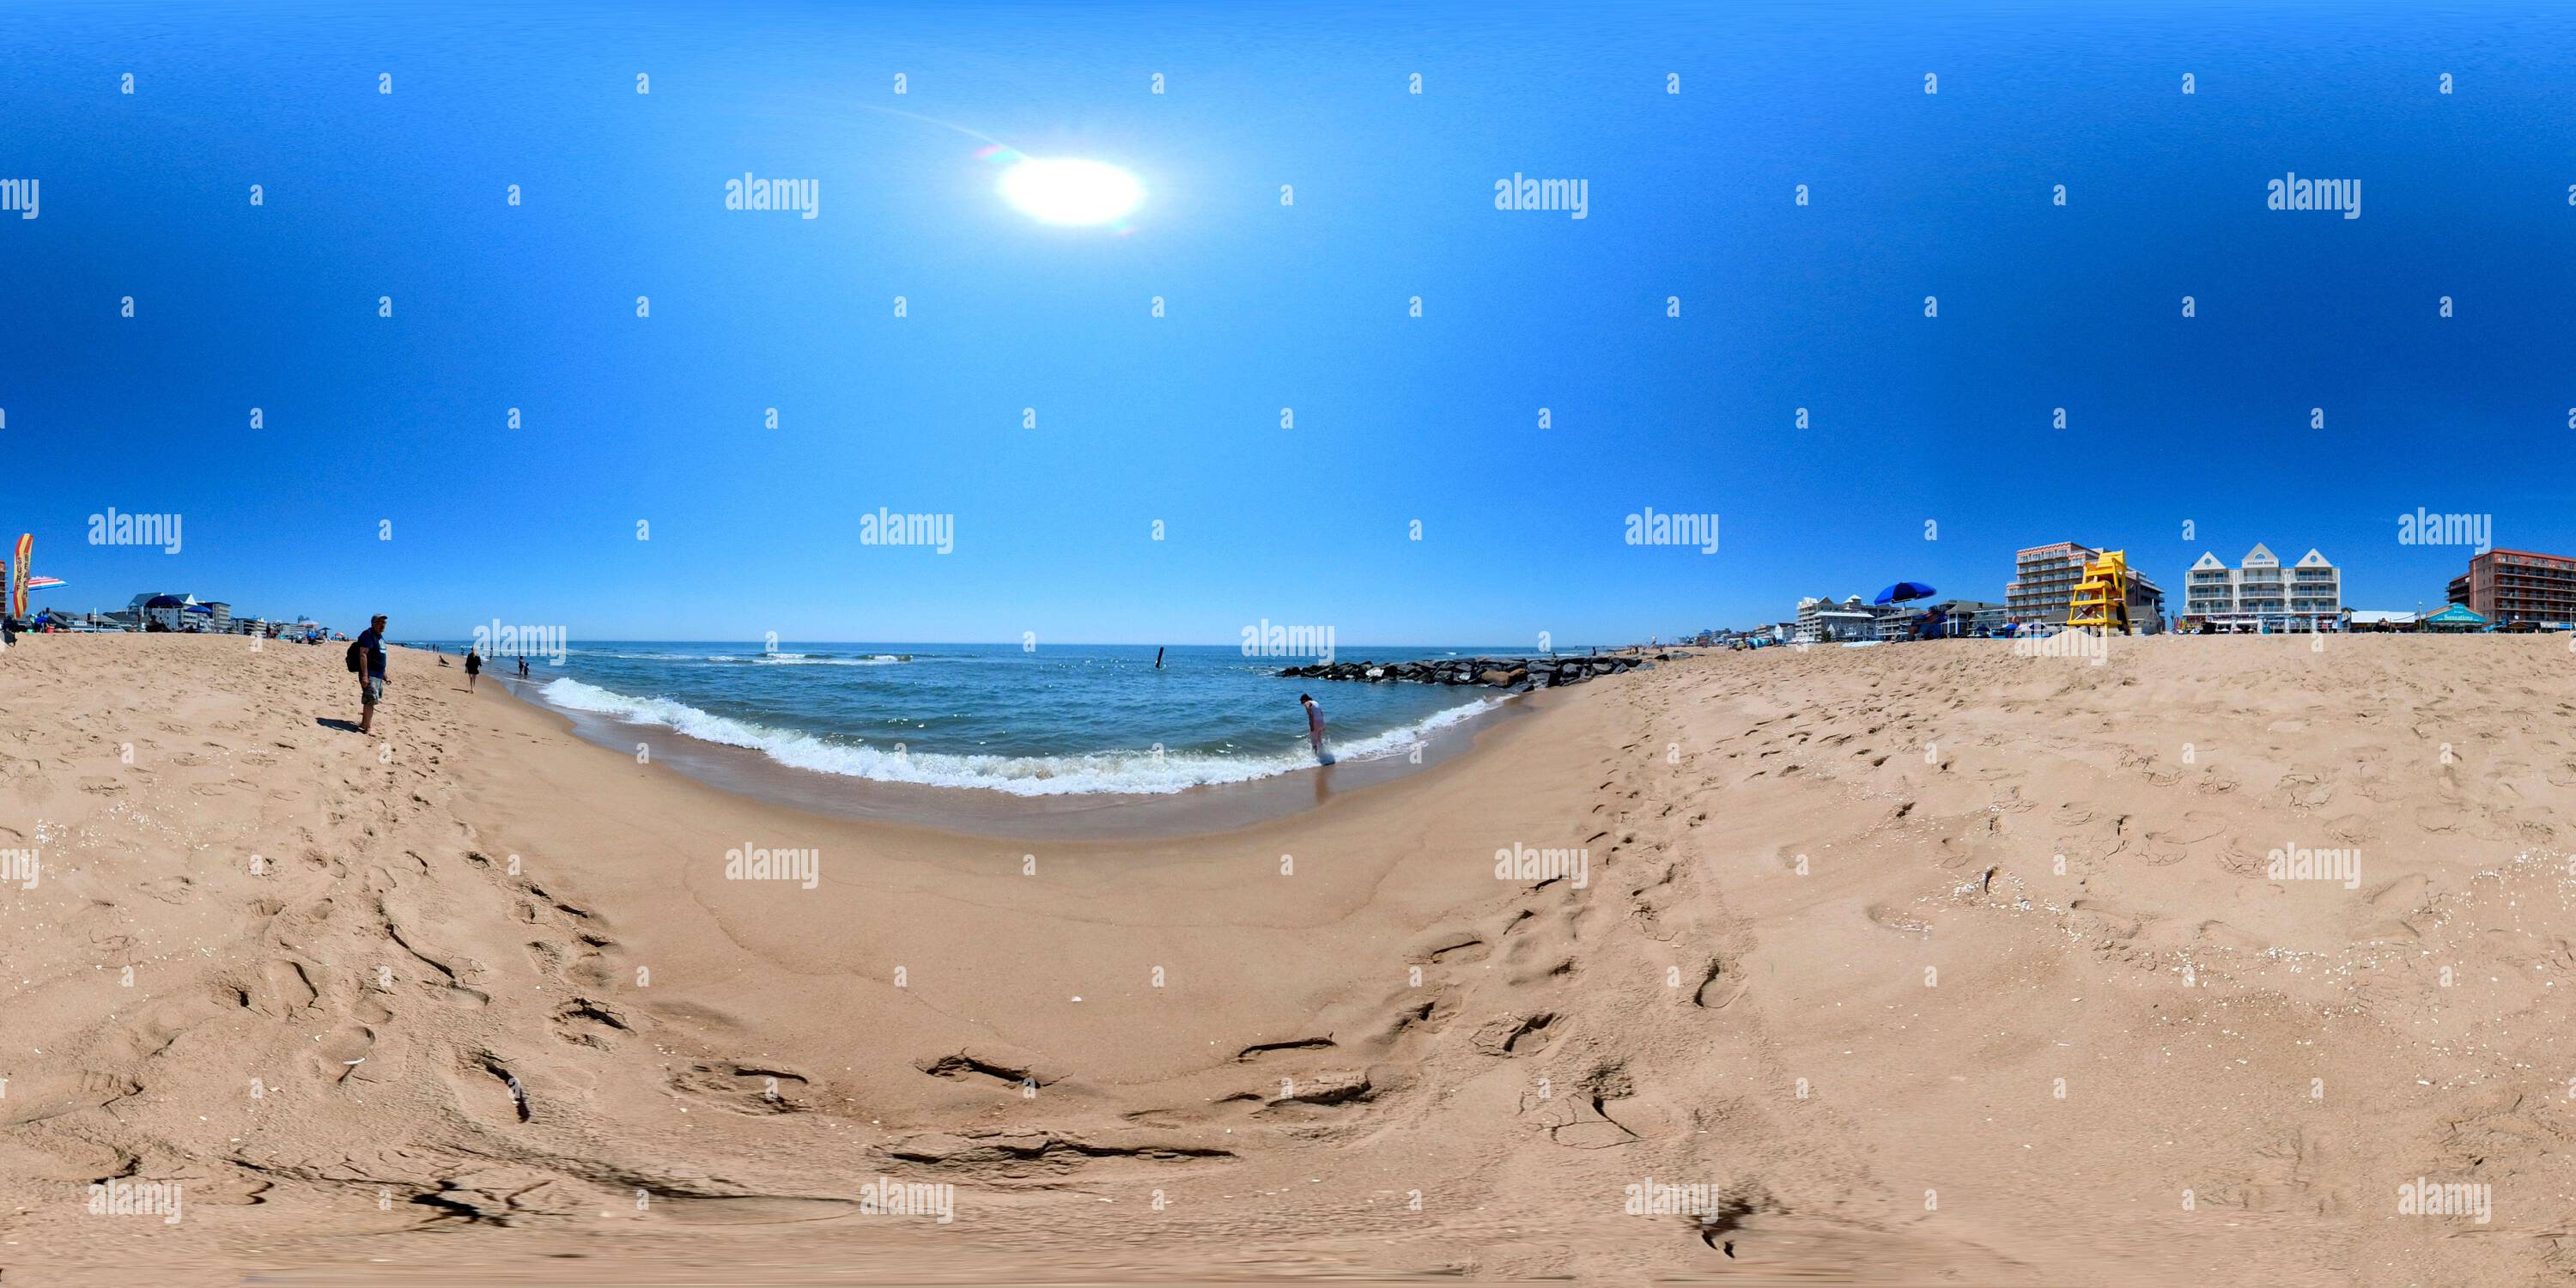 360 degree panoramic view of On the beach in Ocean City, Maryland near 9th Street